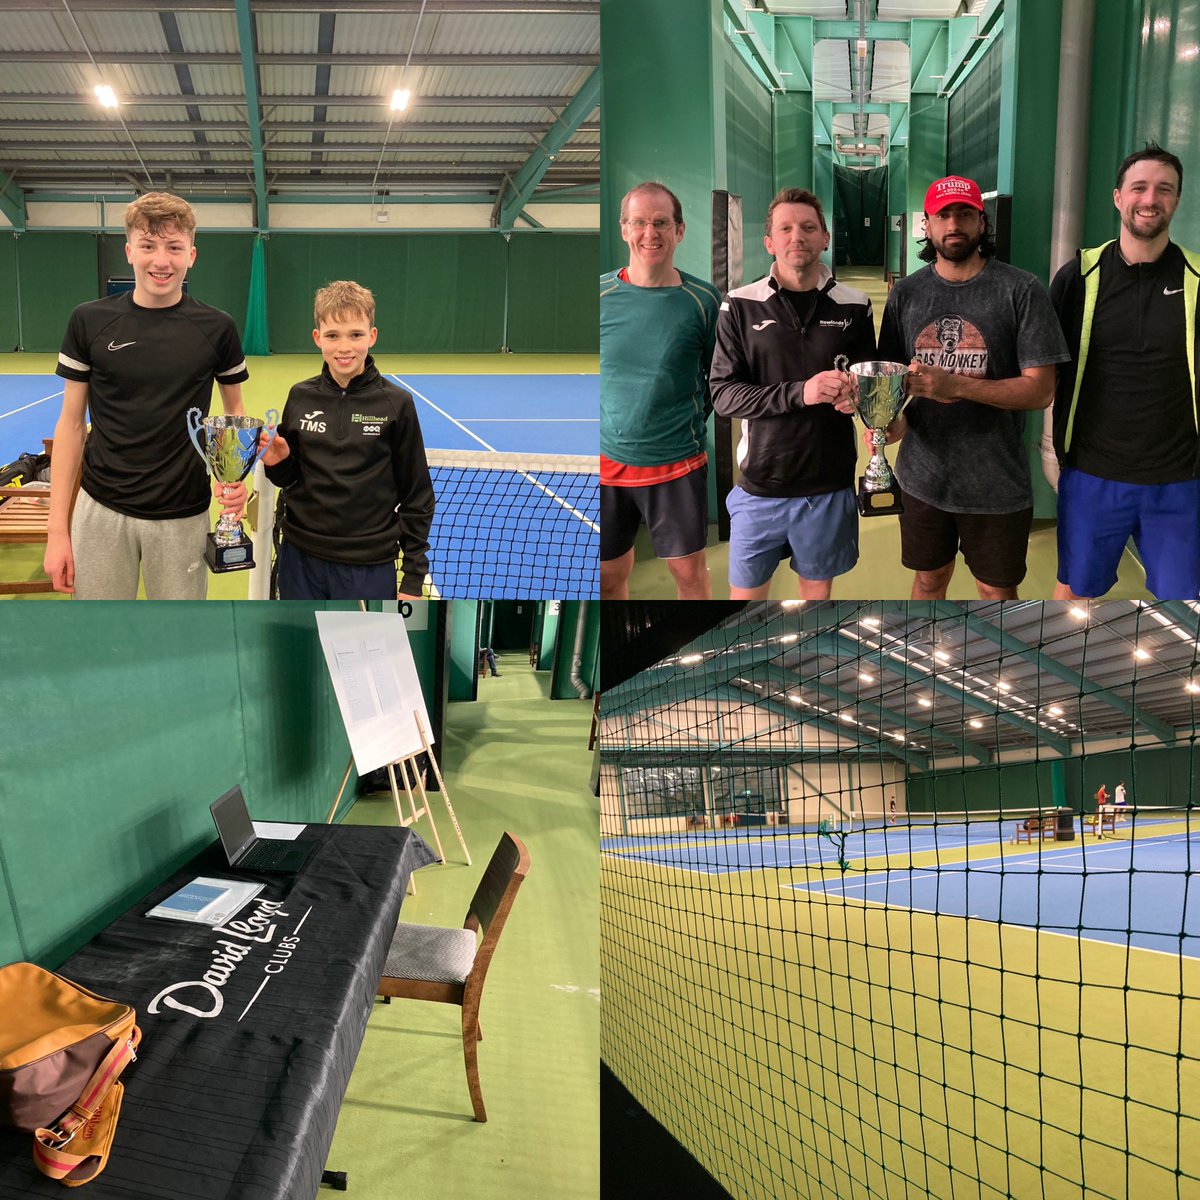 @tennisscotland G5 at @DavidLloydUK Hamilton yday. 24 players involved and 33 matches played with players from all over Scotland in attendance. @abtennisacademy player Harry Carman with the W over @SUTC1 Tim Goldie. Consolation won by @HillheadTennis player Thomas Sproule vs